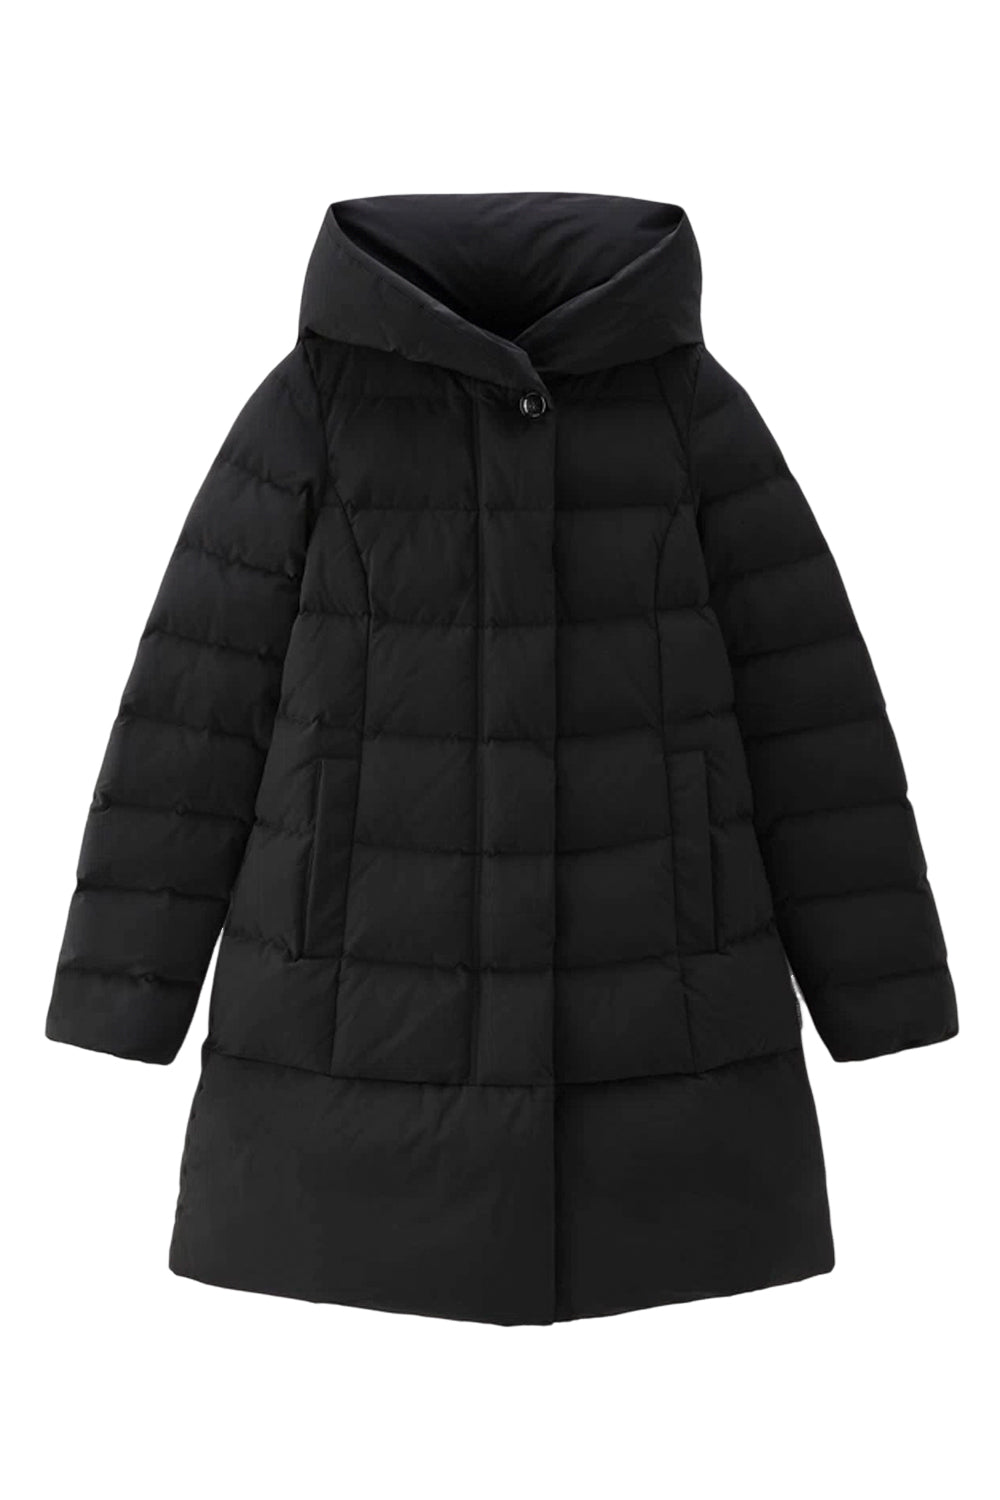 Image of WOOLRICH Puffy Prescott Parka in Urban Touch